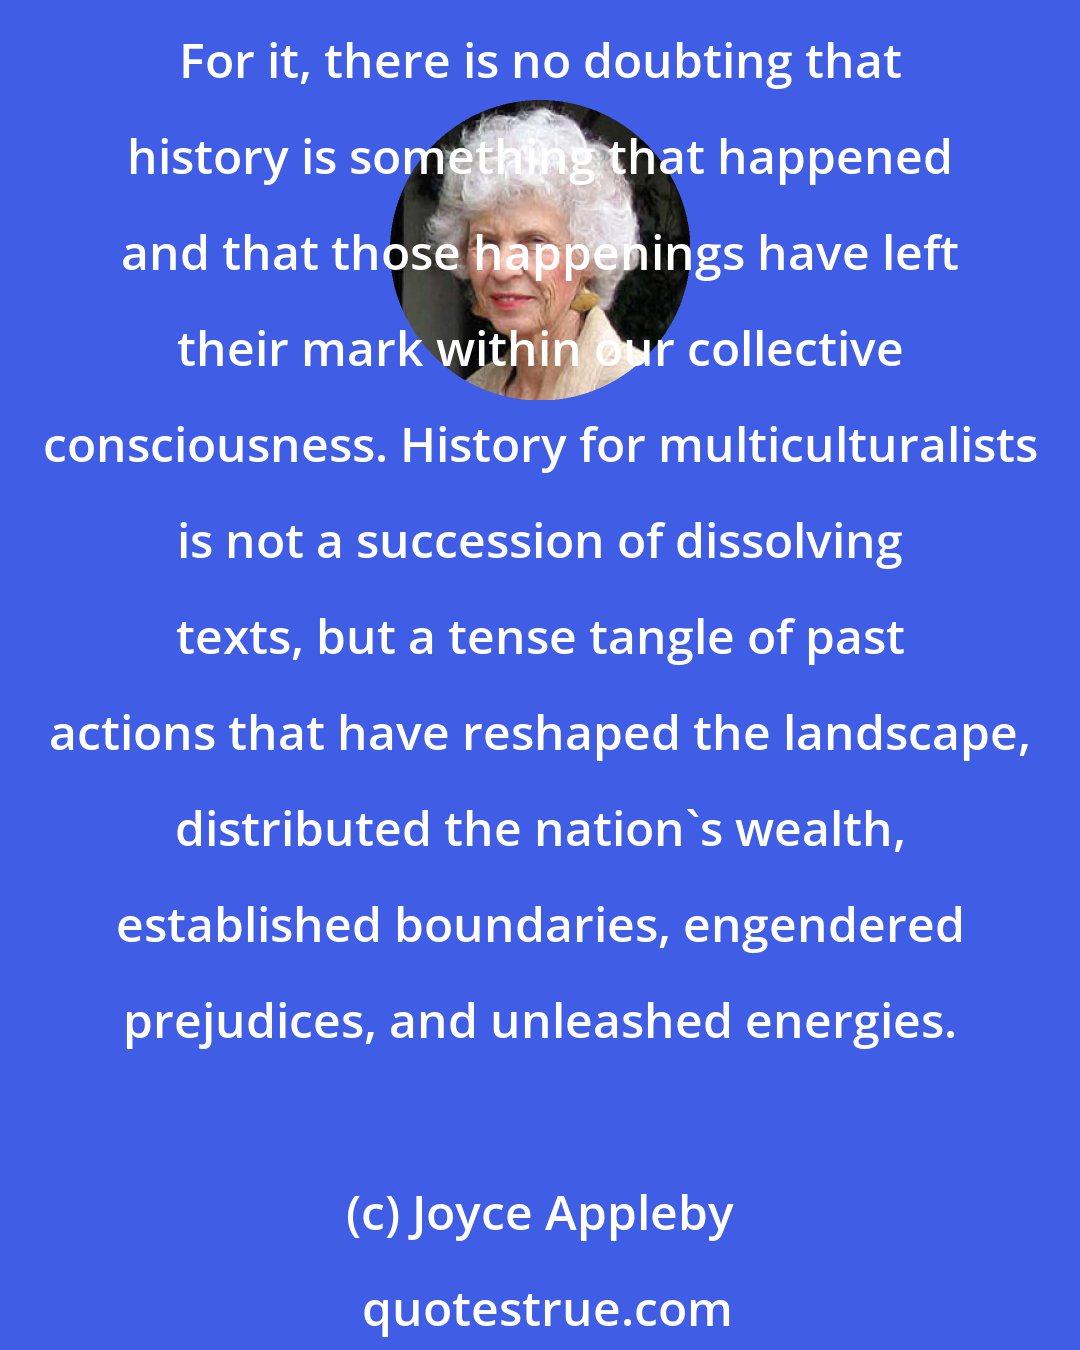 Joyce Appleby: It is important to note that multiculturalism does not share the postmodernist stance. Its passions are political; its assumptionsempirical; its conception of identities visceral. For it, there is no doubting that history is something that happened and that those happenings have left their mark within our collective consciousness. History for multiculturalists is not a succession of dissolving texts, but a tense tangle of past actions that have reshaped the landscape, distributed the nation's wealth, established boundaries, engendered prejudices, and unleashed energies.